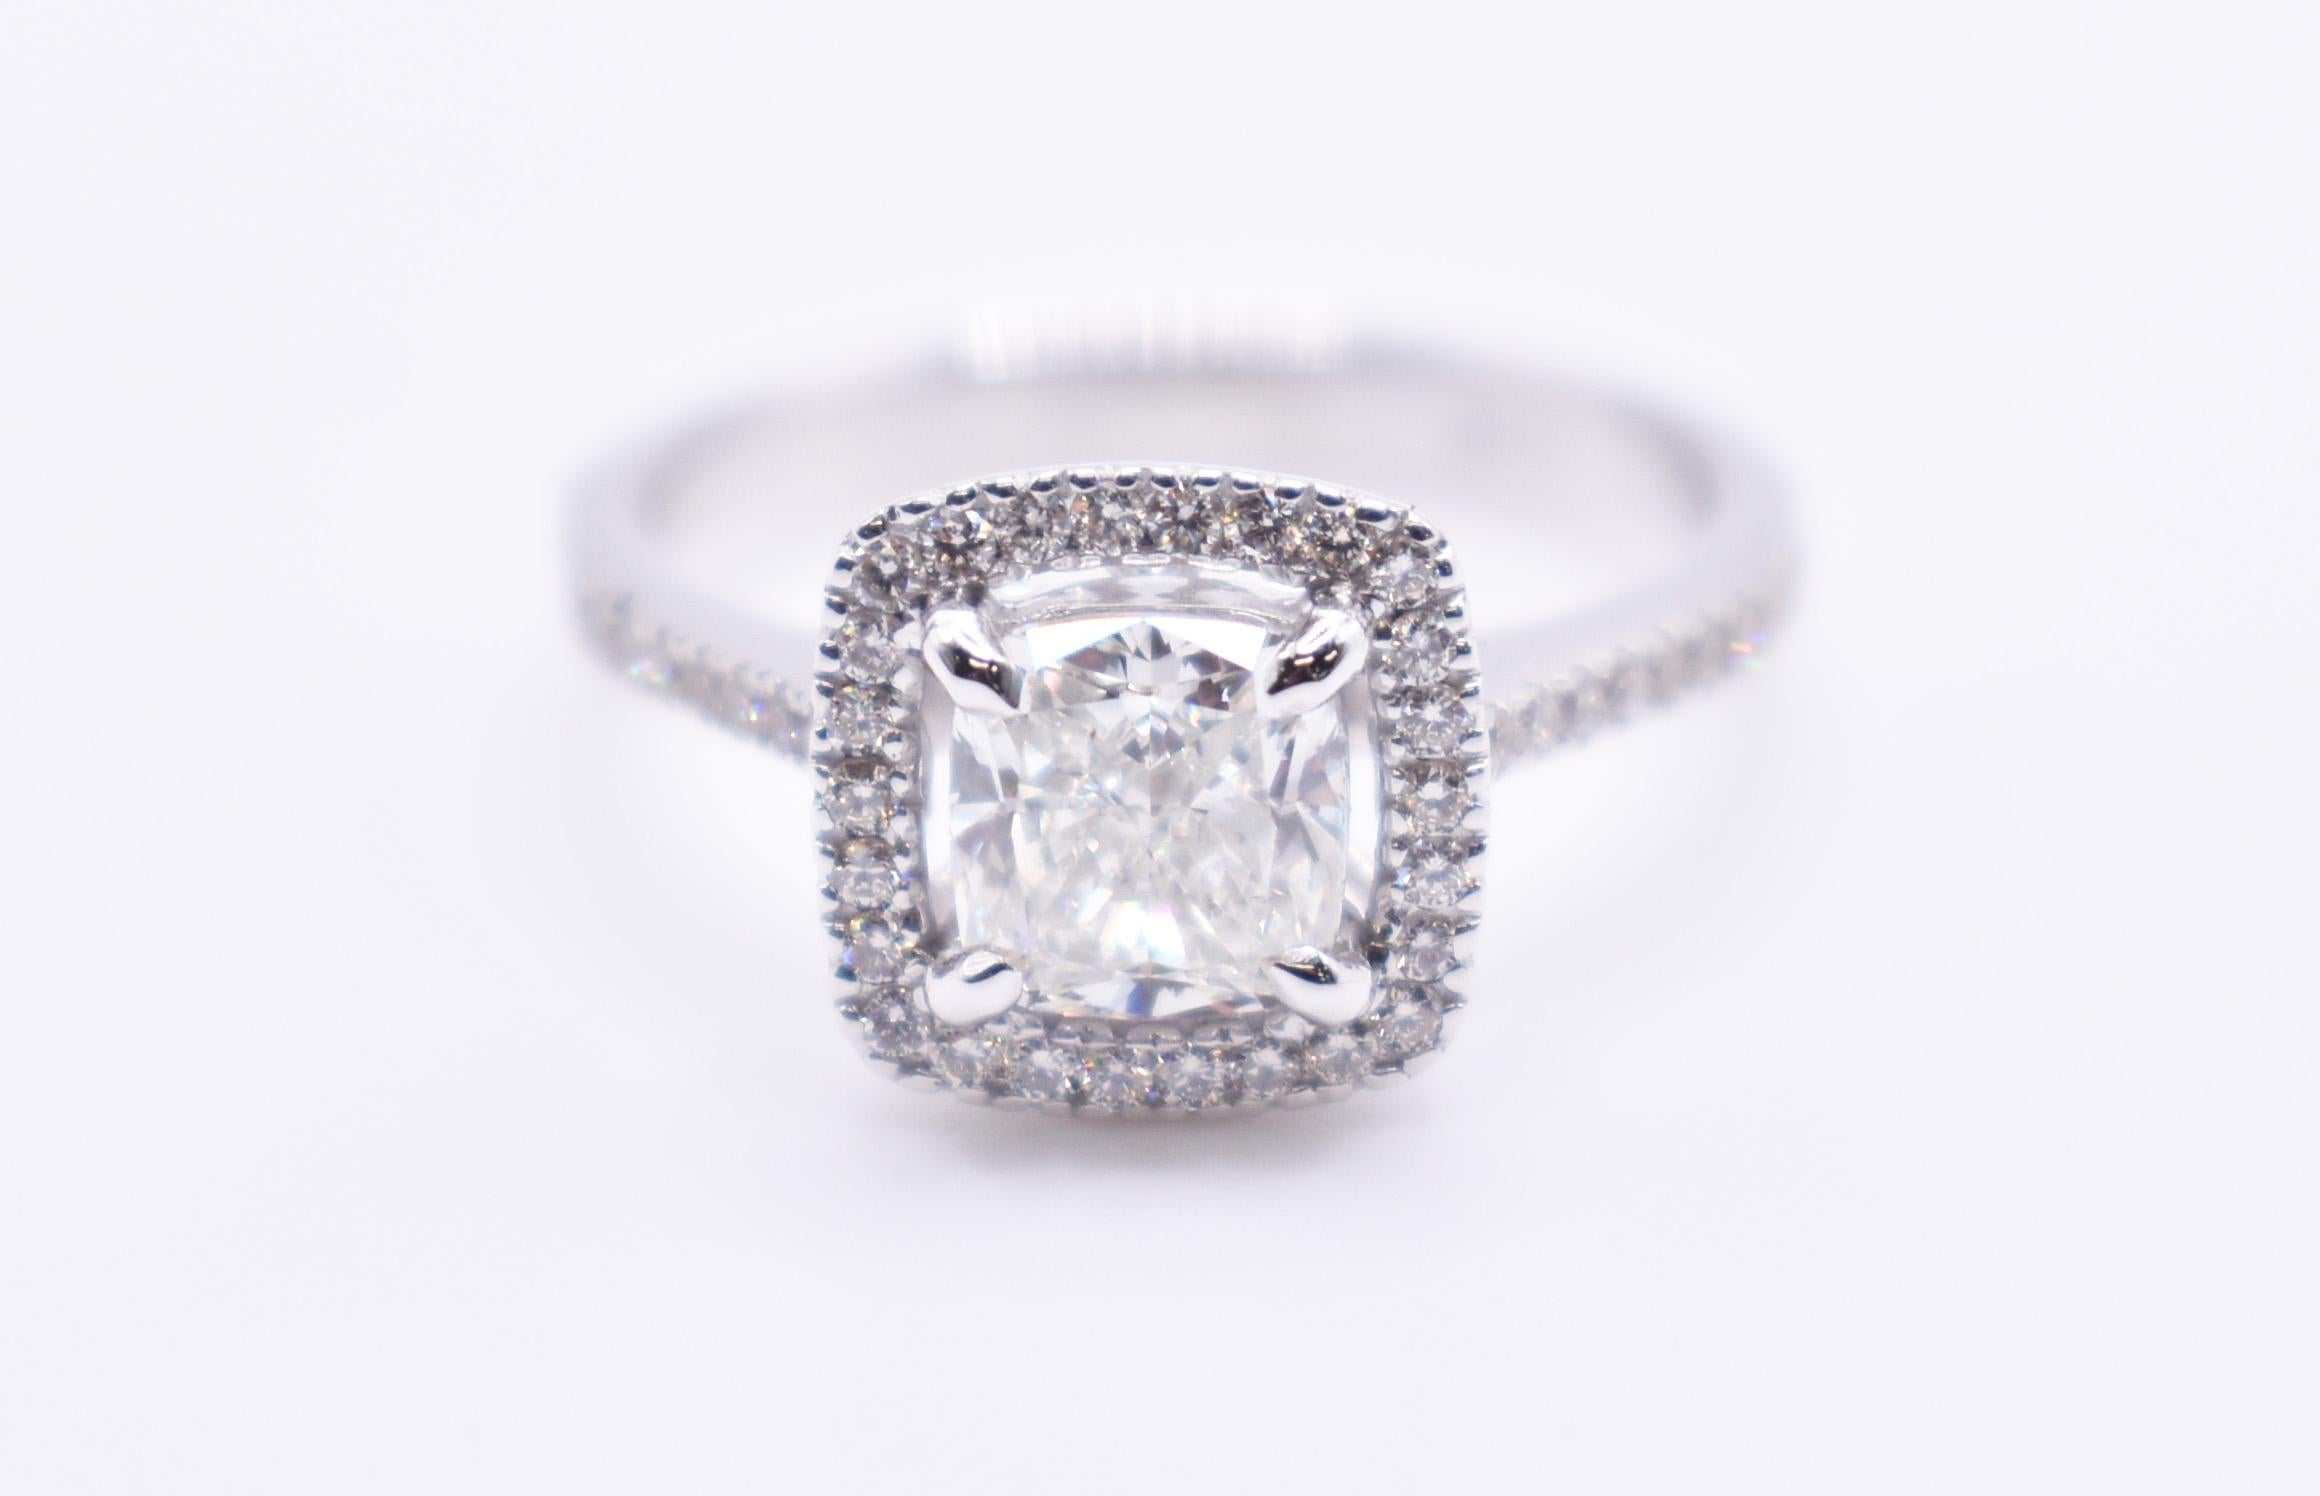 On offer for sale is a truly stunning GIA certified 18k white gold cushion cut diamond engagement ring, having a 1.30ct cushion cut diamond to the centre, with a halo of round cut diamonds and pave sides. 

Metal: 18K White Gold
Total Carat Weight: